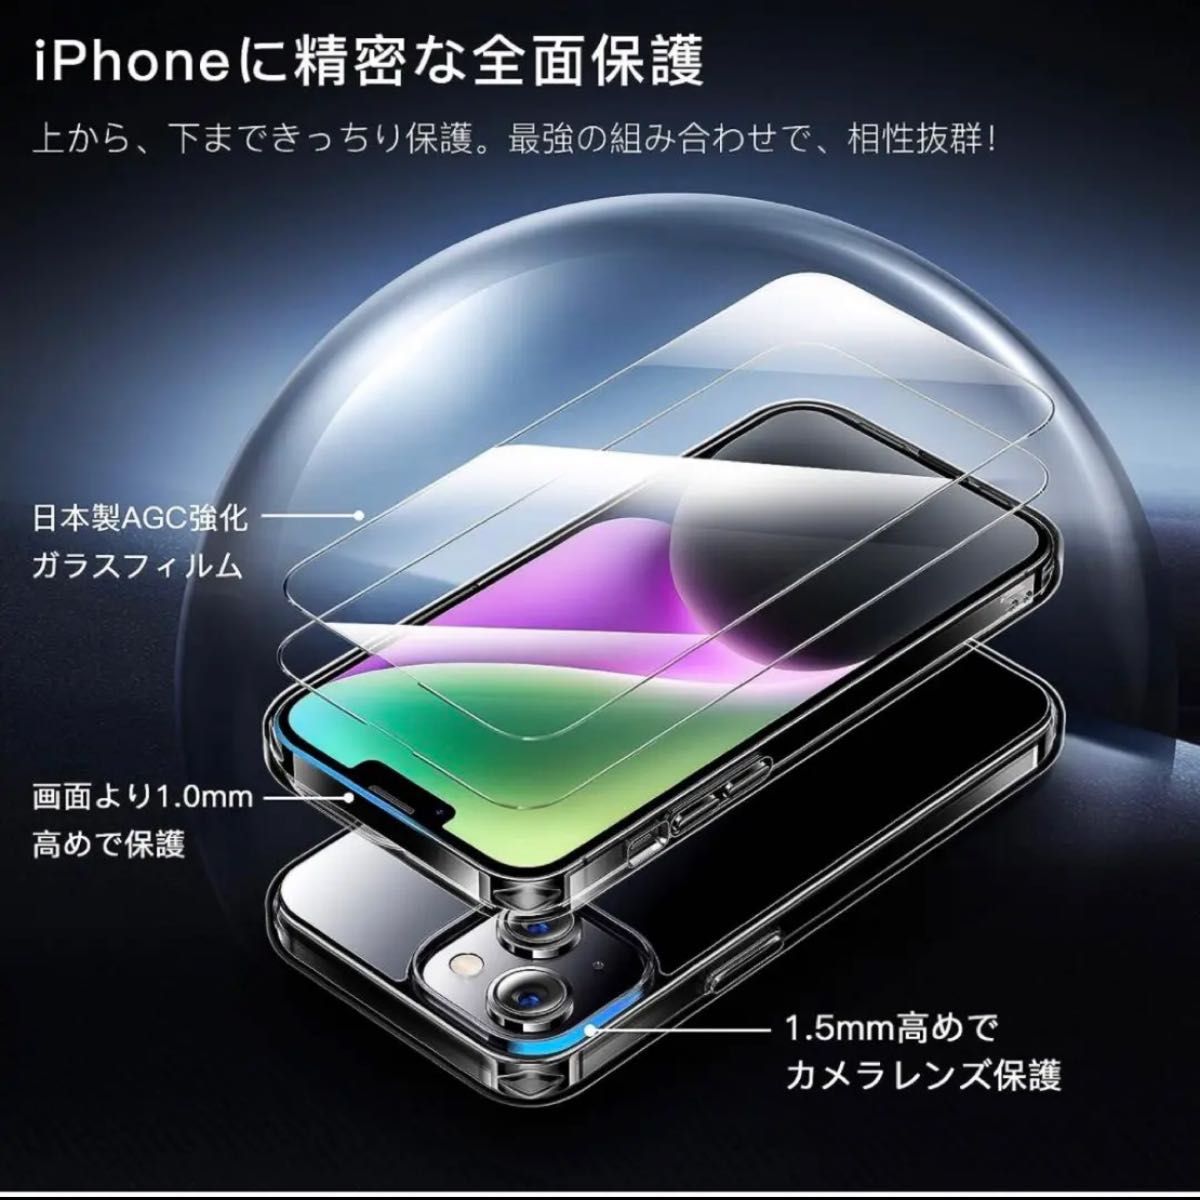 iPhone 14 pro max 用 フィルム付きケース　クリア